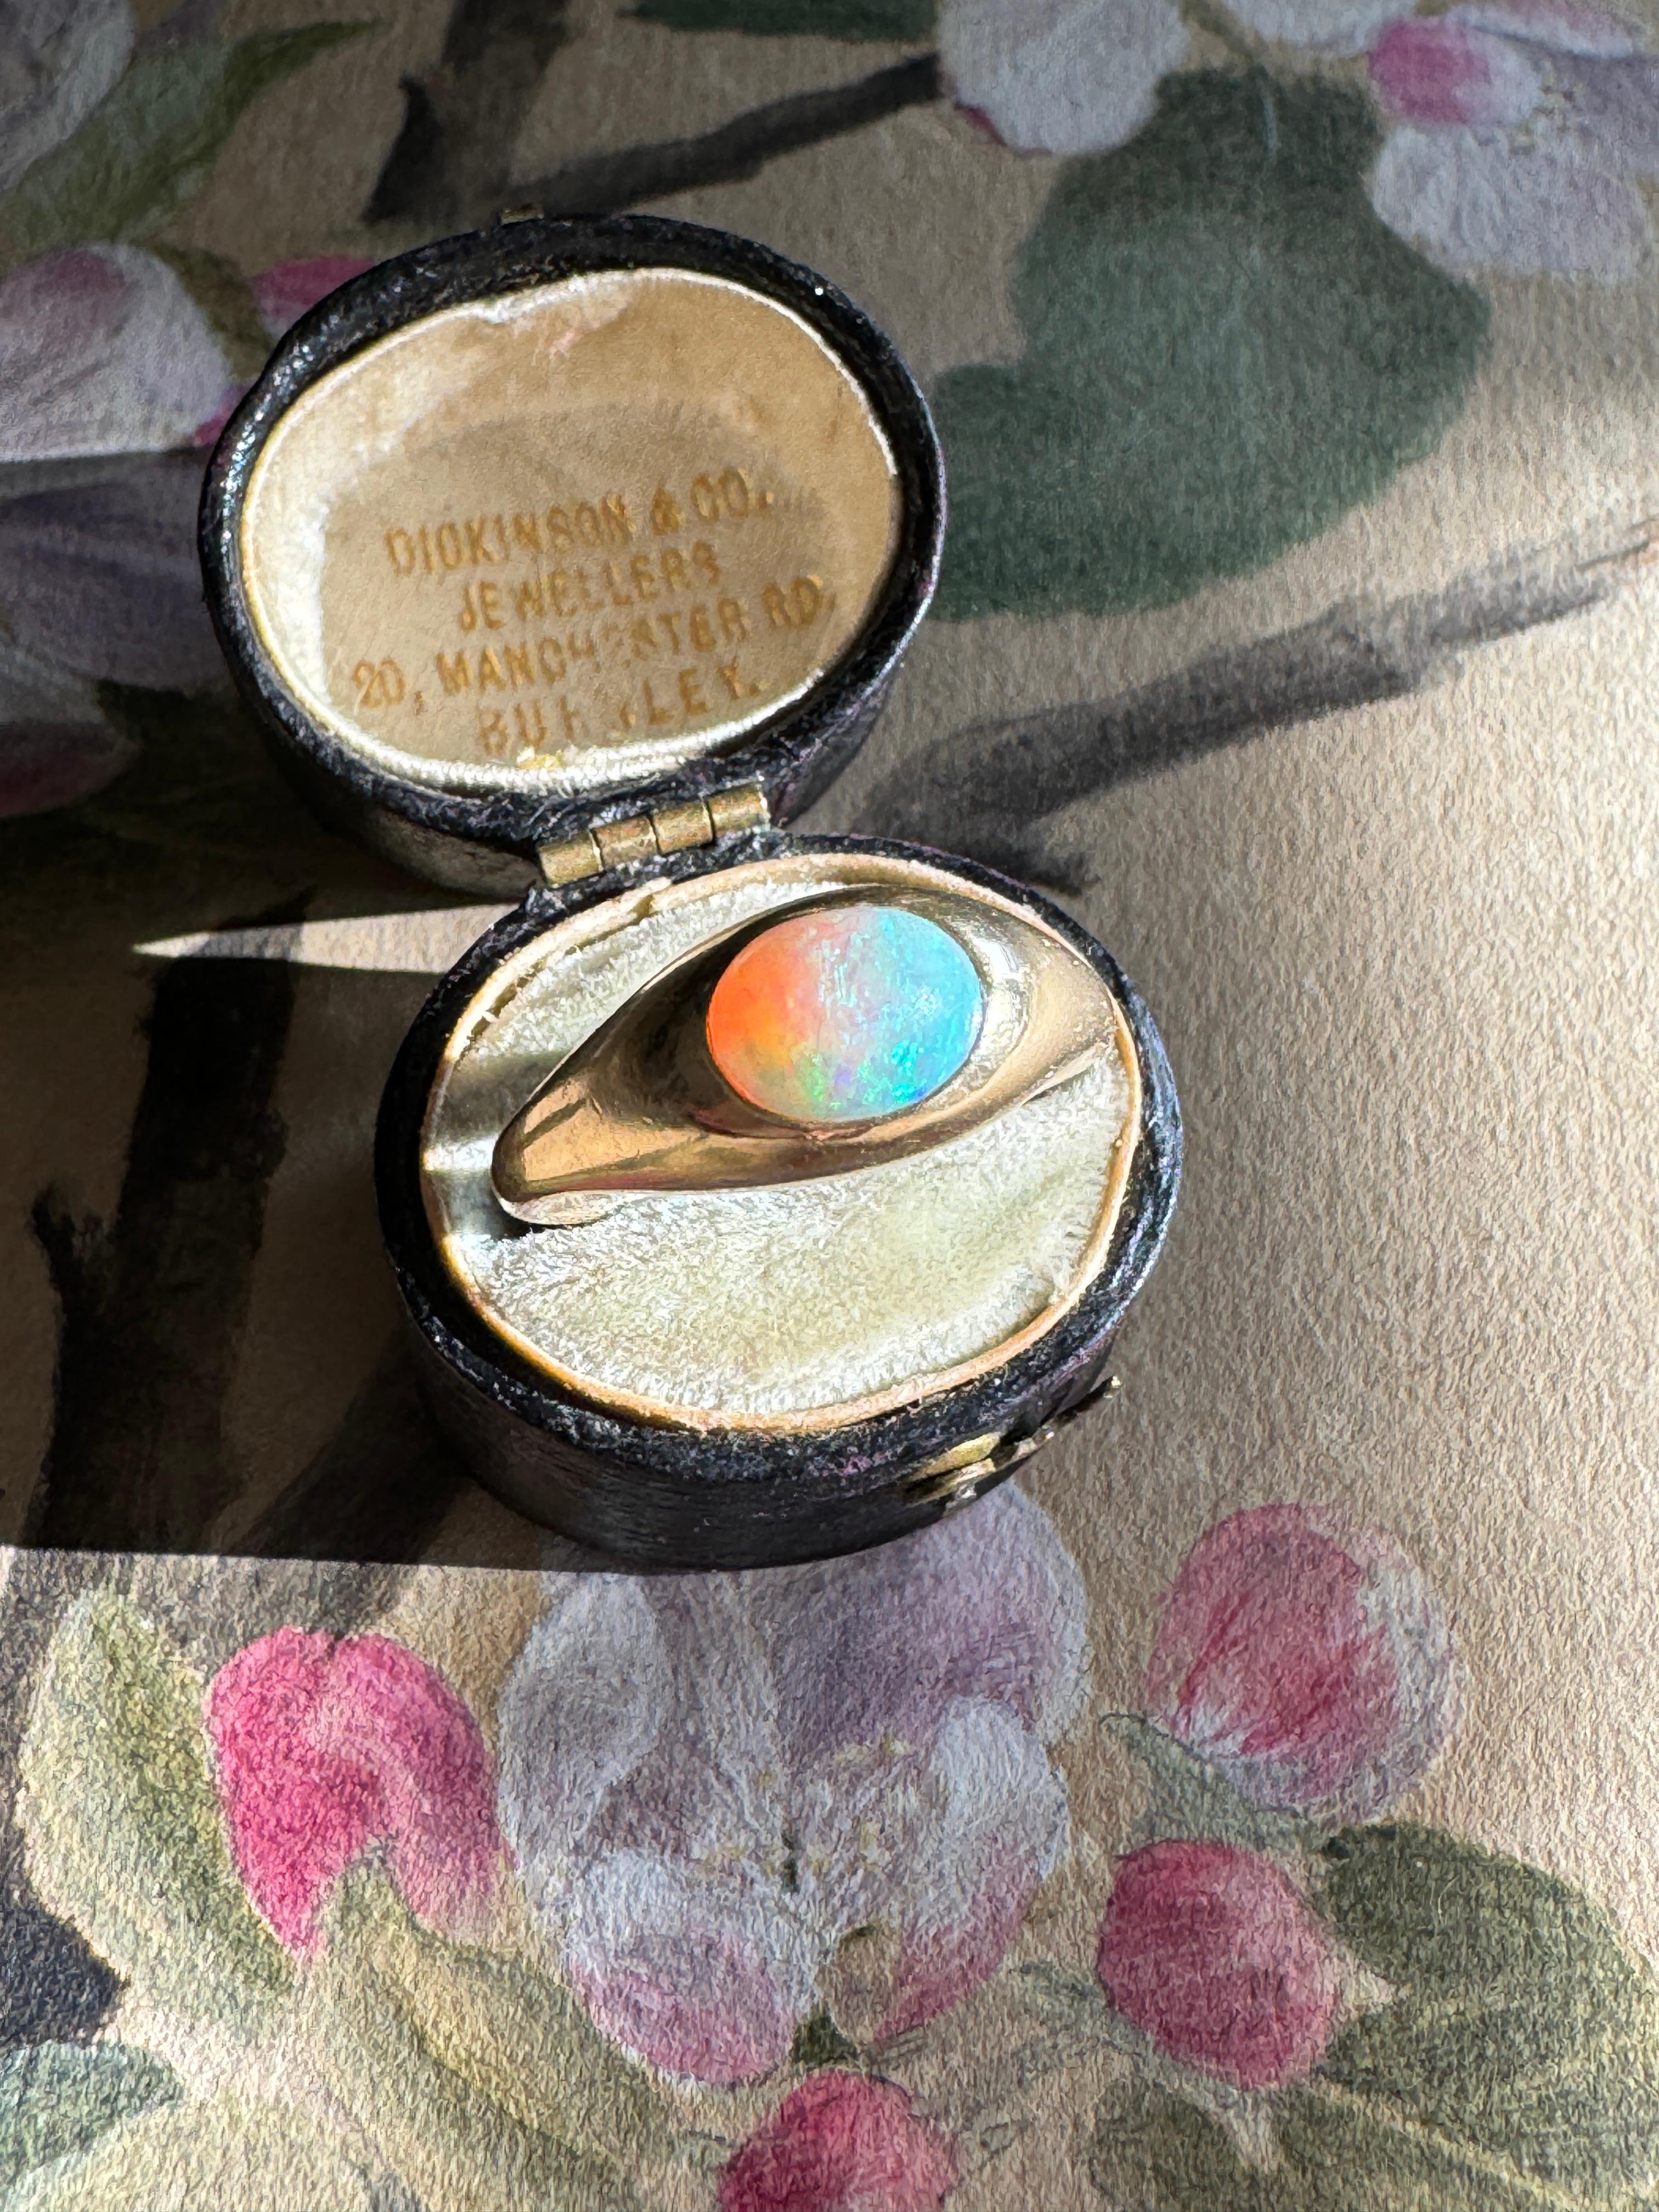 A lovely Art Nouveau ring by Larter & Sons of Newark, NJ showcases a cabochon opal presented in a 14 karat gold flush set mounting. Currently a ring size 6.25


Weight: 4.6 grams

Size: 6.25

Measurements: 7.64 mm north to south

Opal: 8.2 x 5.7 x